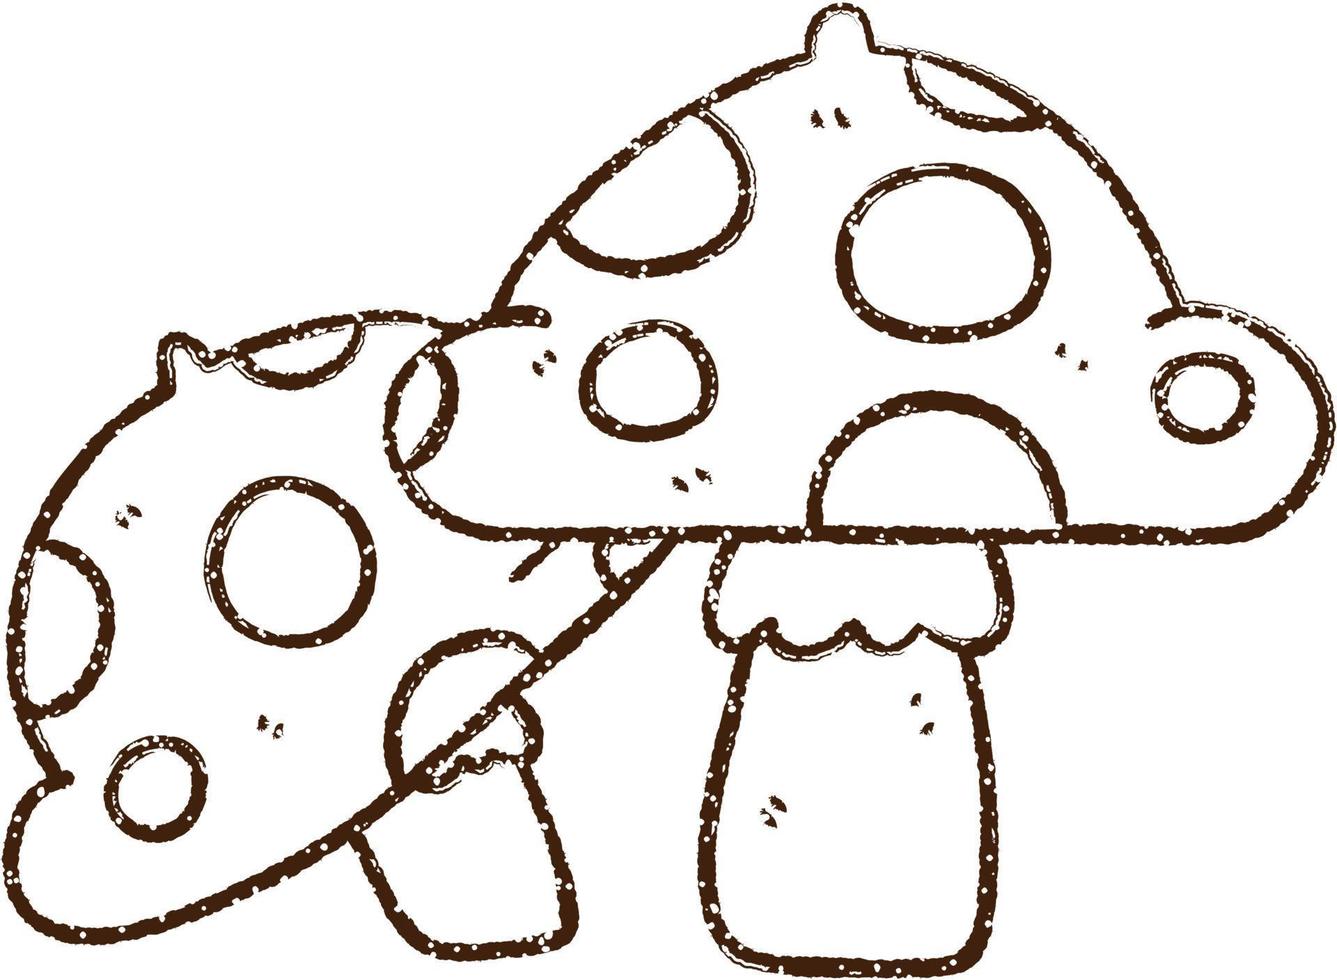 Toadstool Charcoal Drawing vector